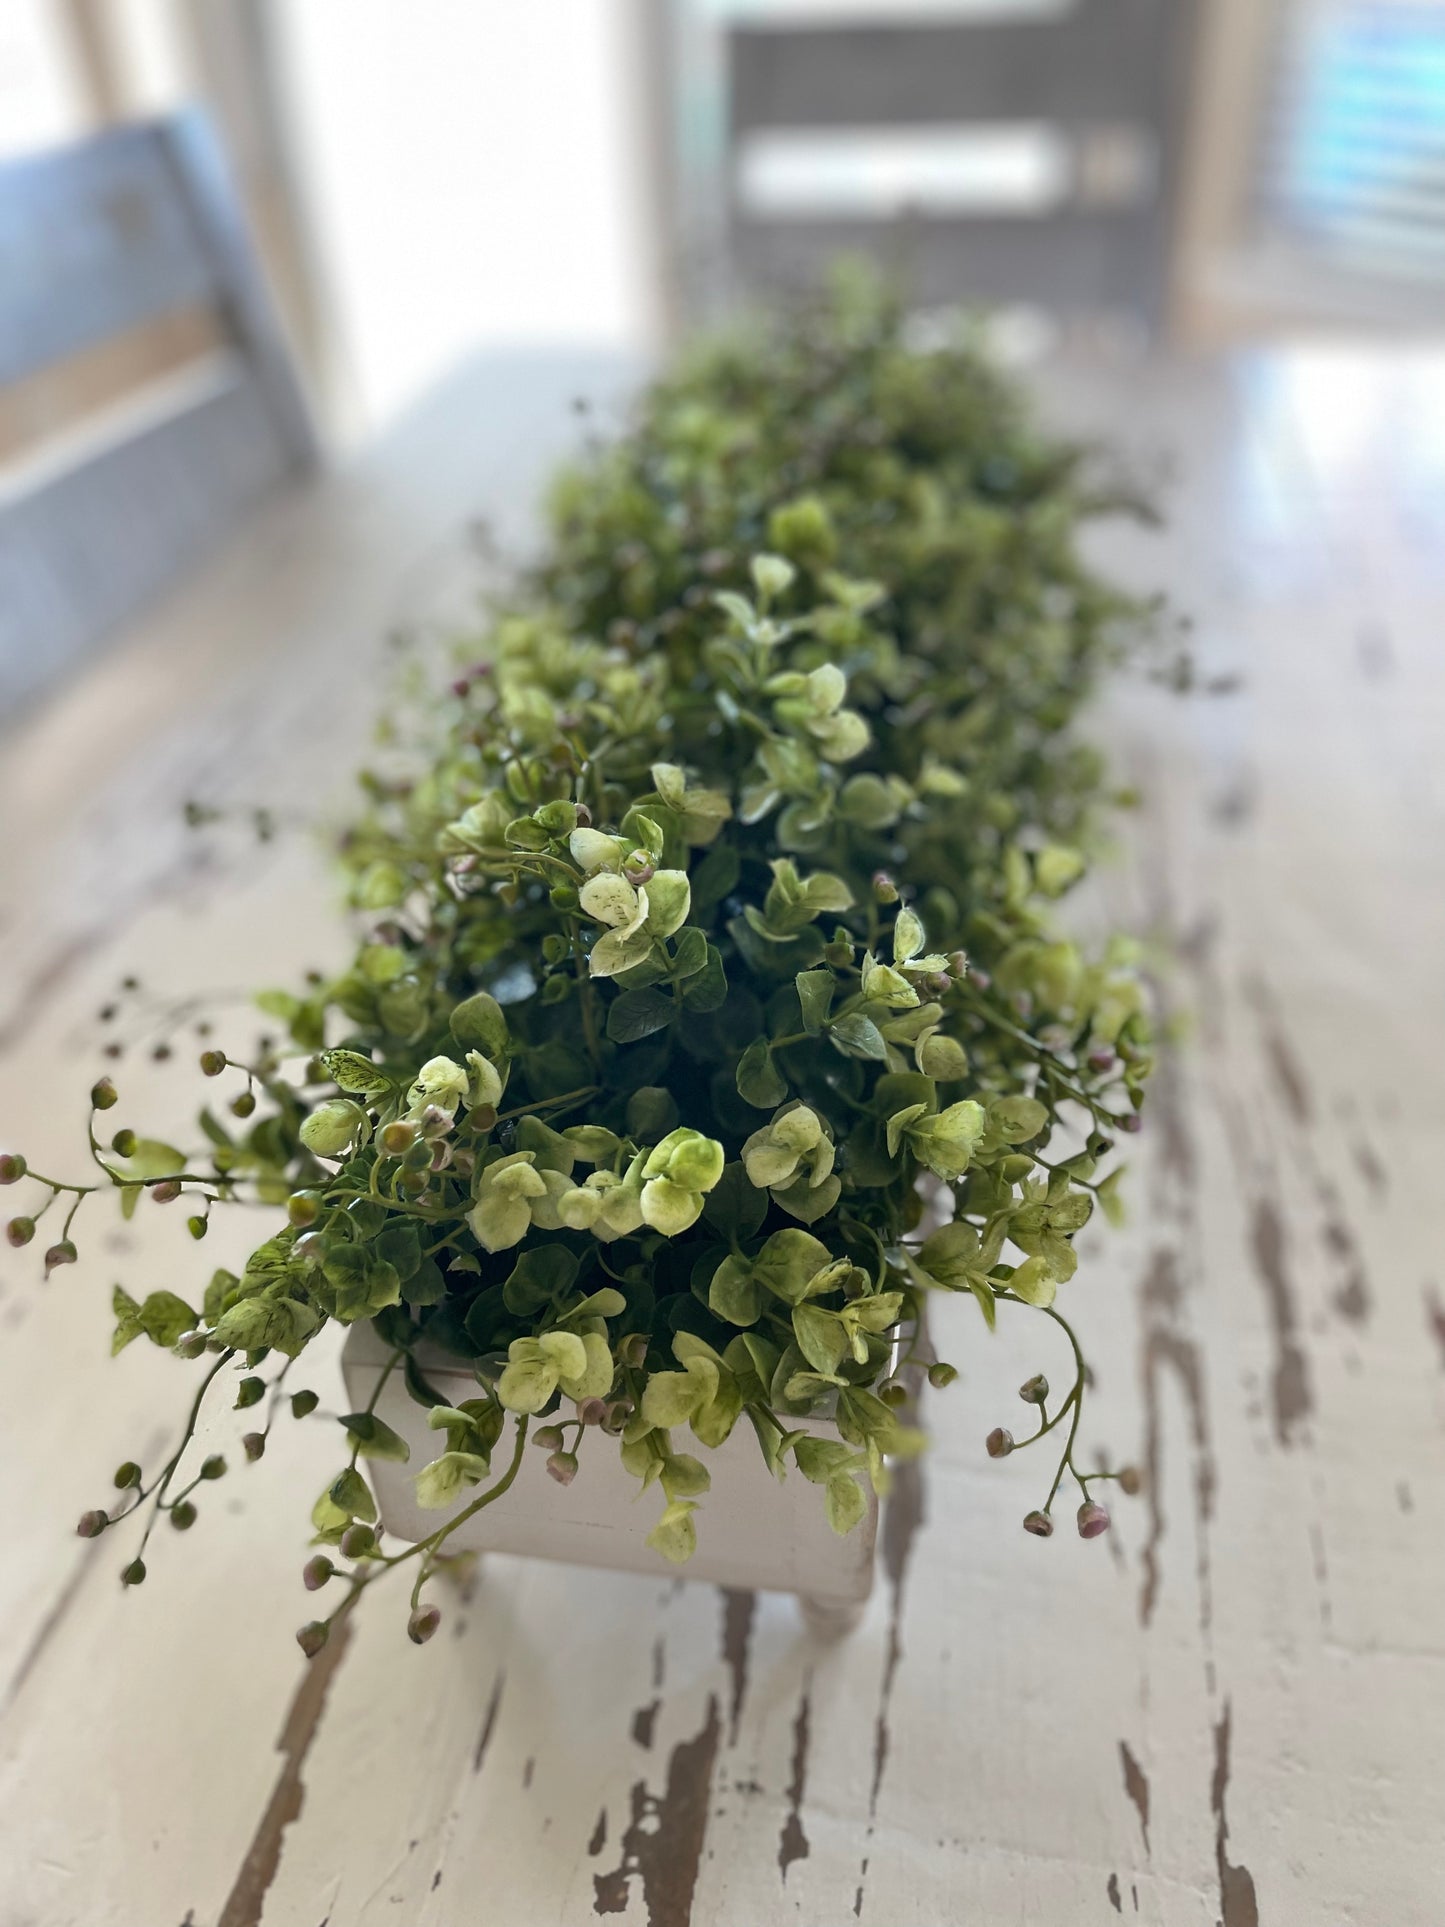 Farmhouse Kitchen Table Greenery Centerpiece | Low Profile Table Centerpieces For Dining Room |